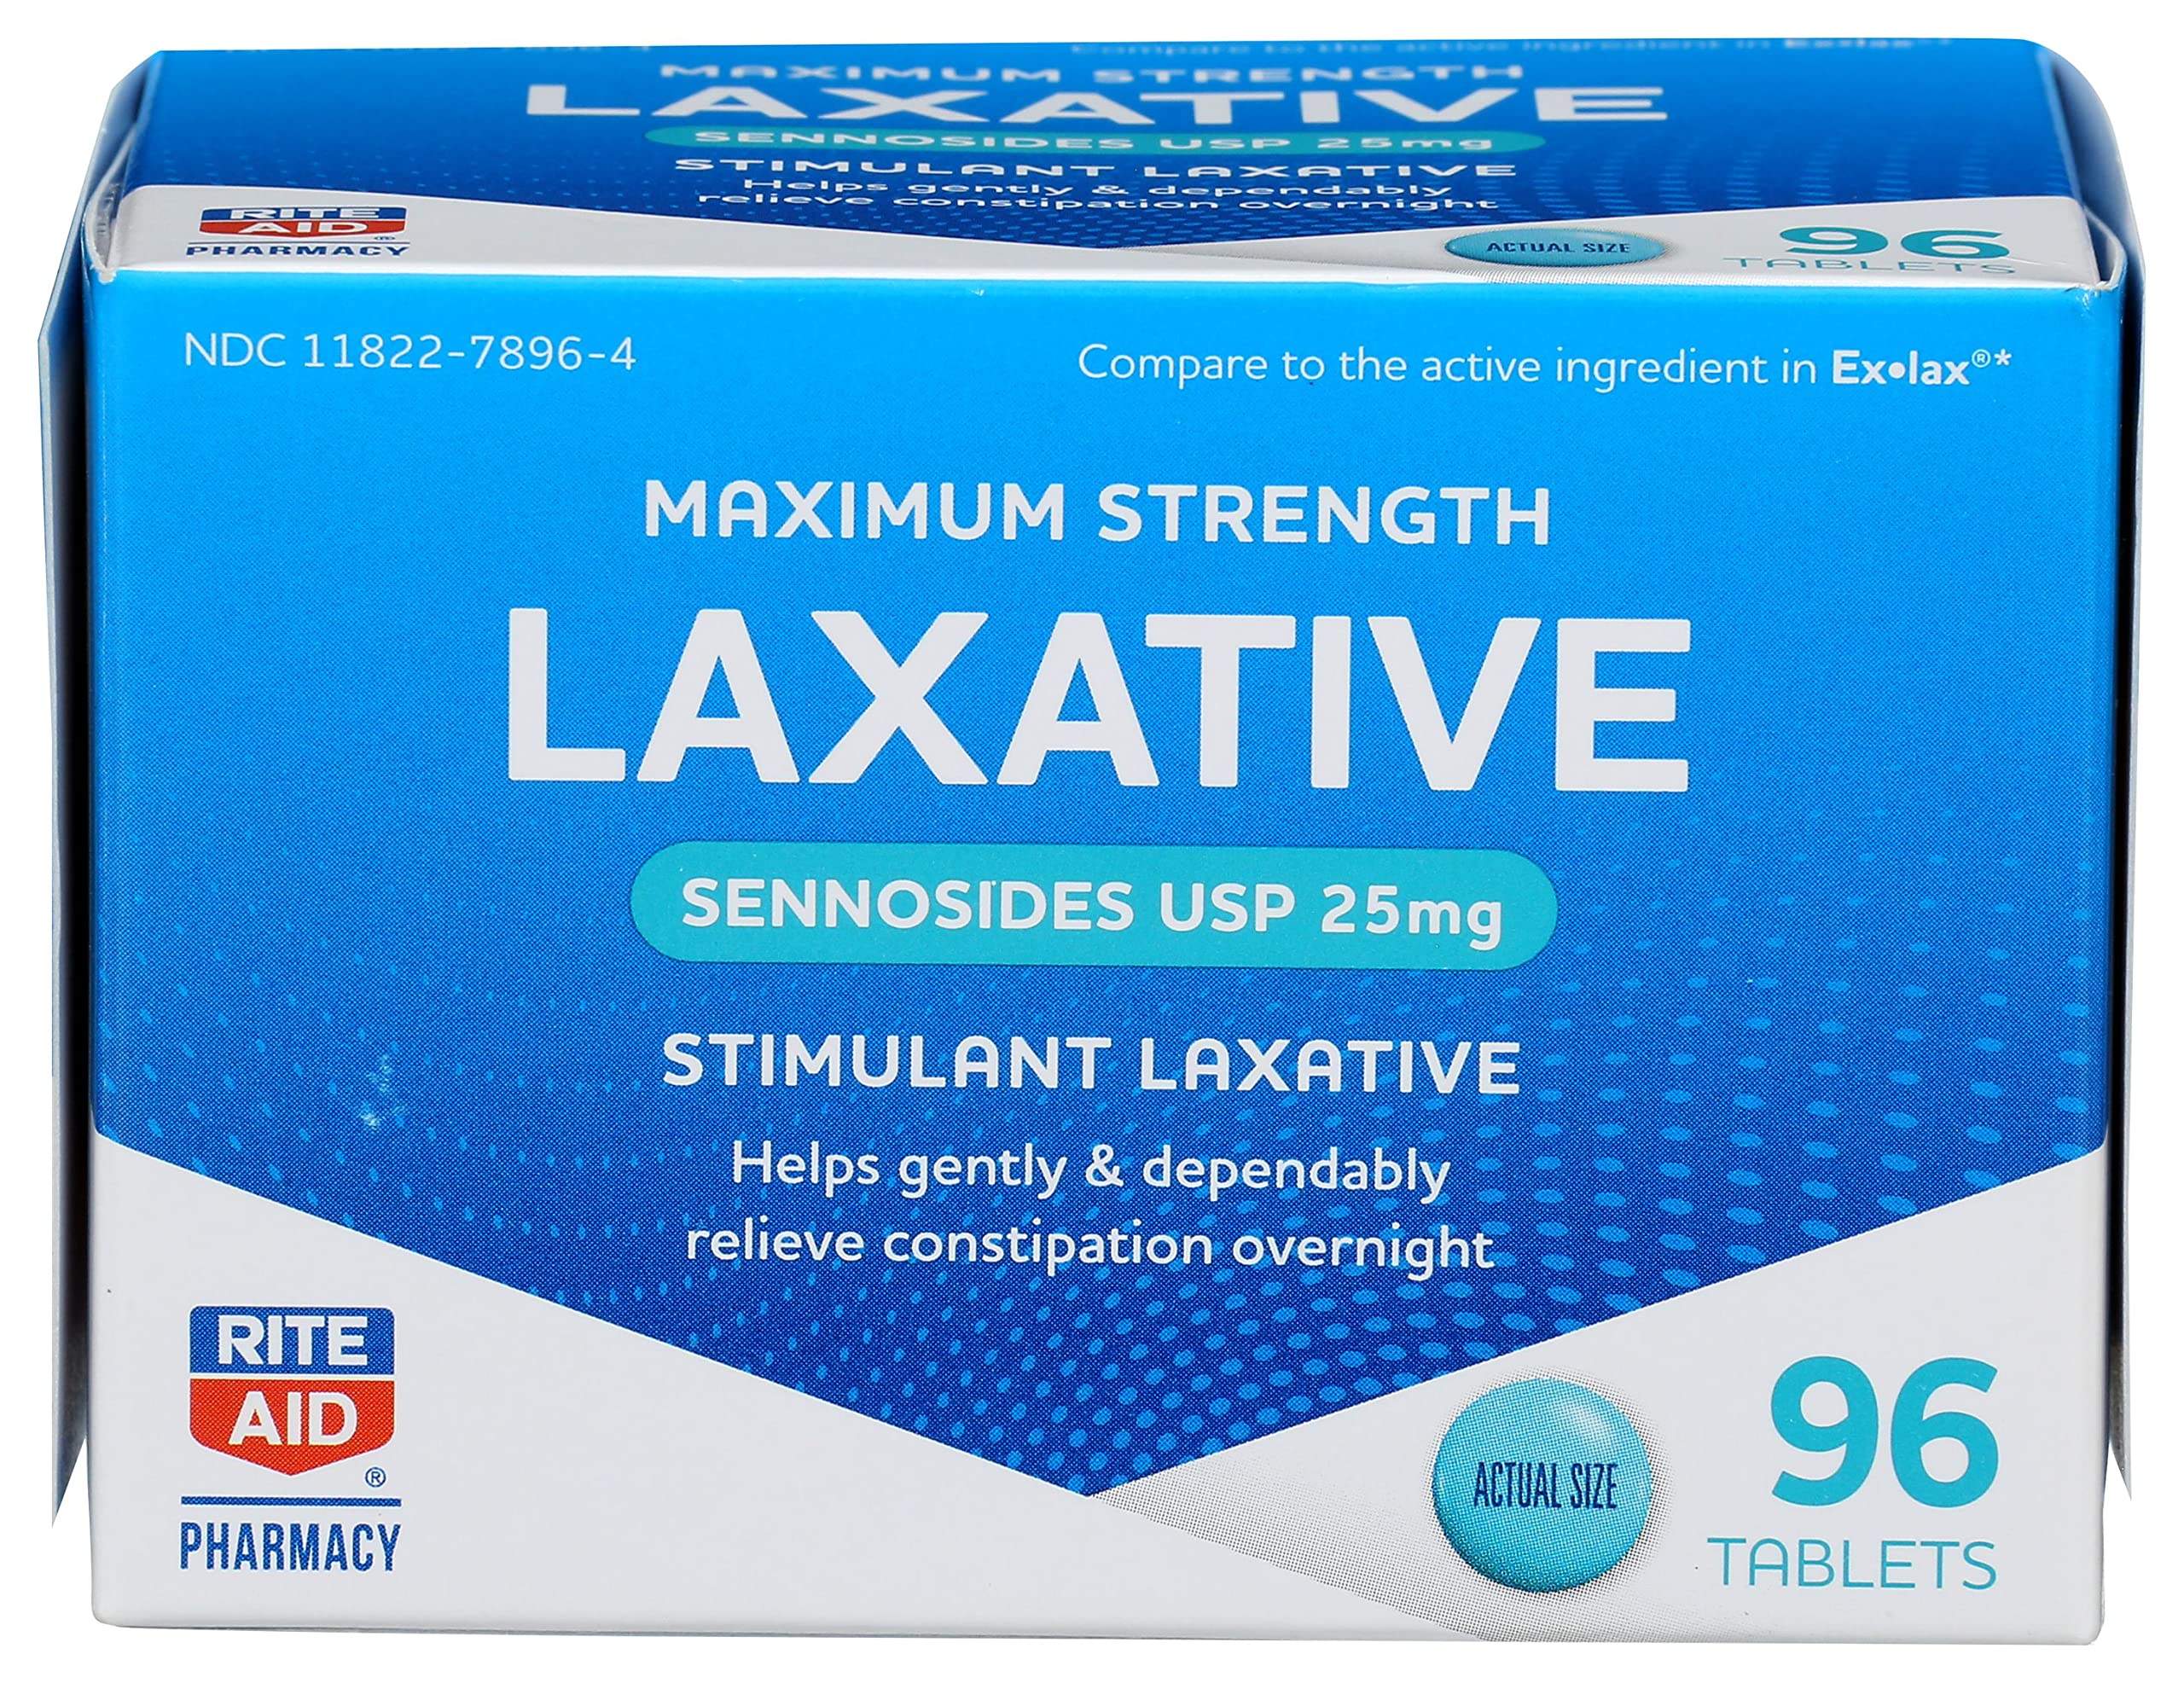 Rite Aid Maximum Strength Laxative, Sennosides USP Tablets, 25 mg, 96 Count | Constipation Relief Laxative Extra Strength | Over